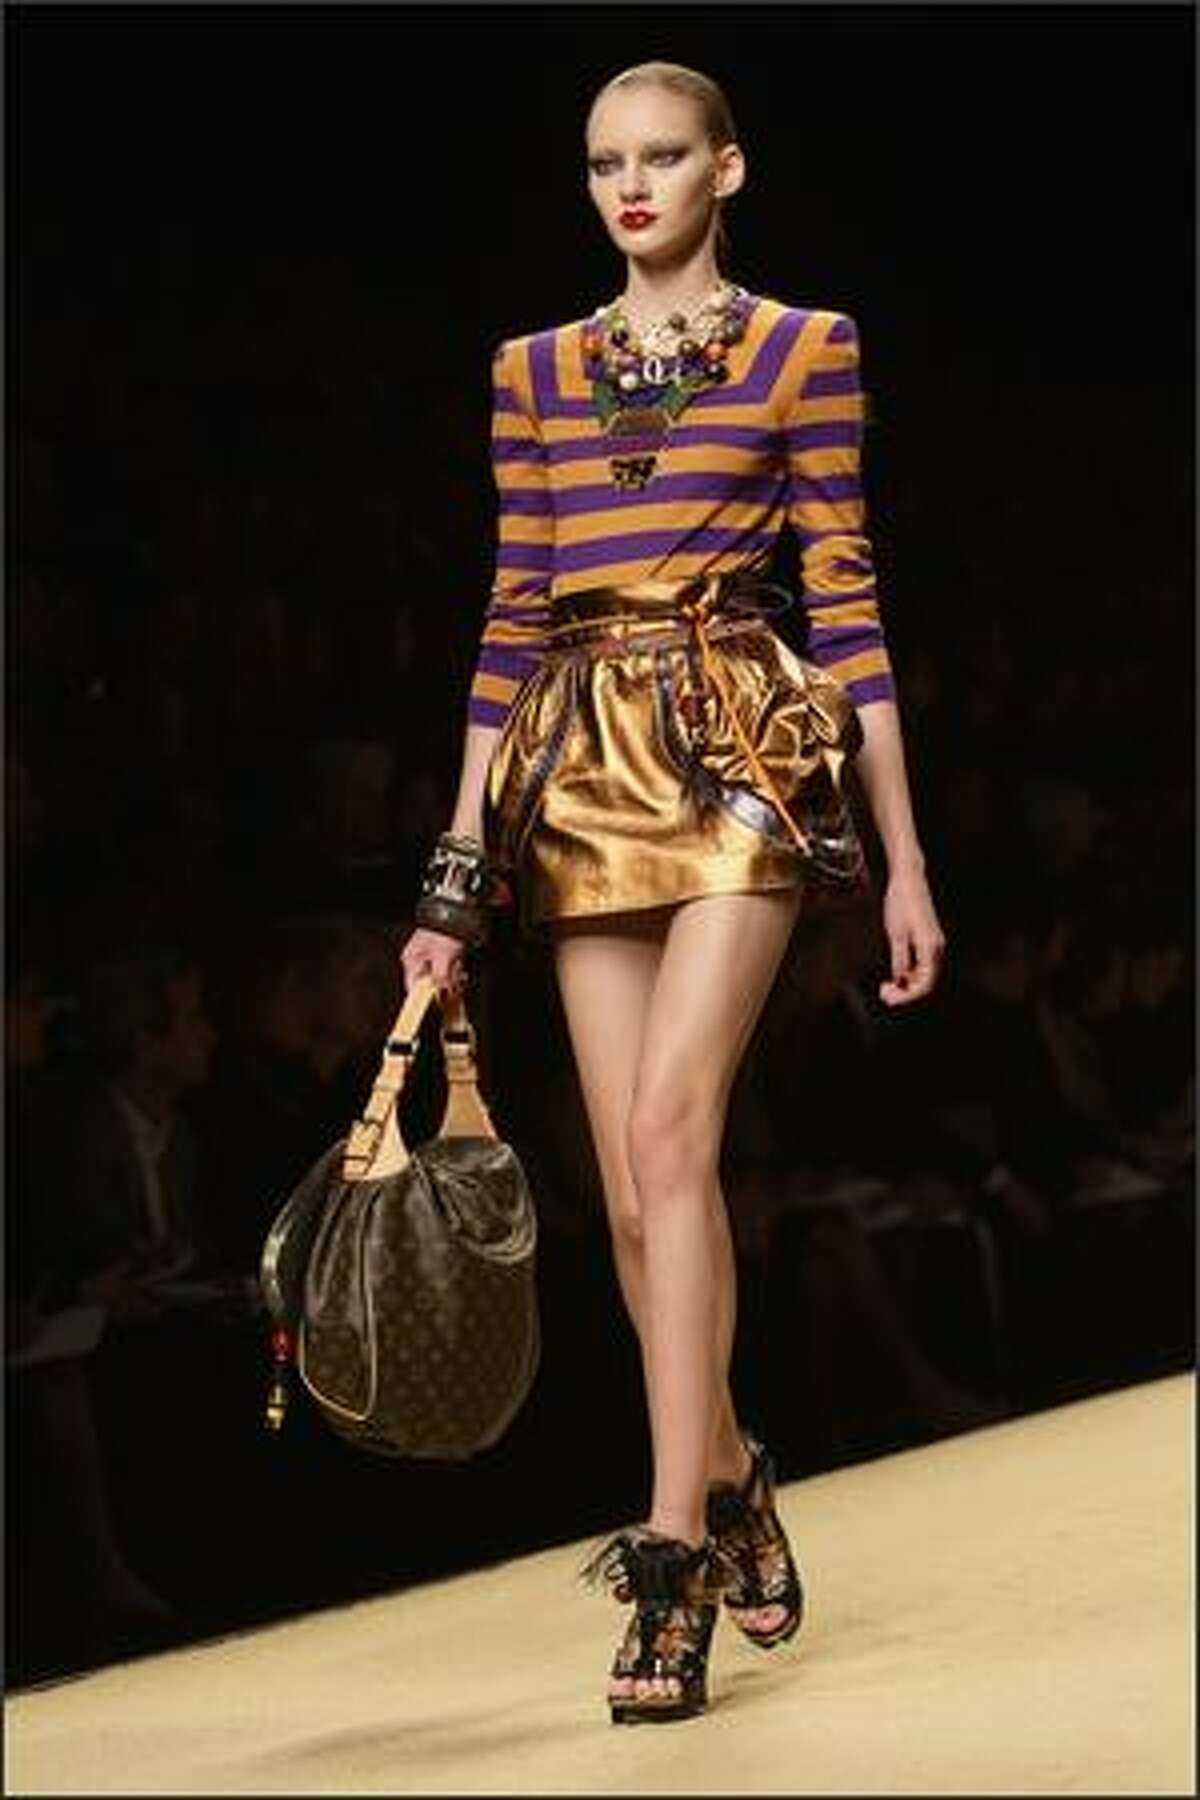 A model presents a creation by designer Marc Jacobs for Louis Vuitton during Paris Fashion Week on Sunday in Paris.